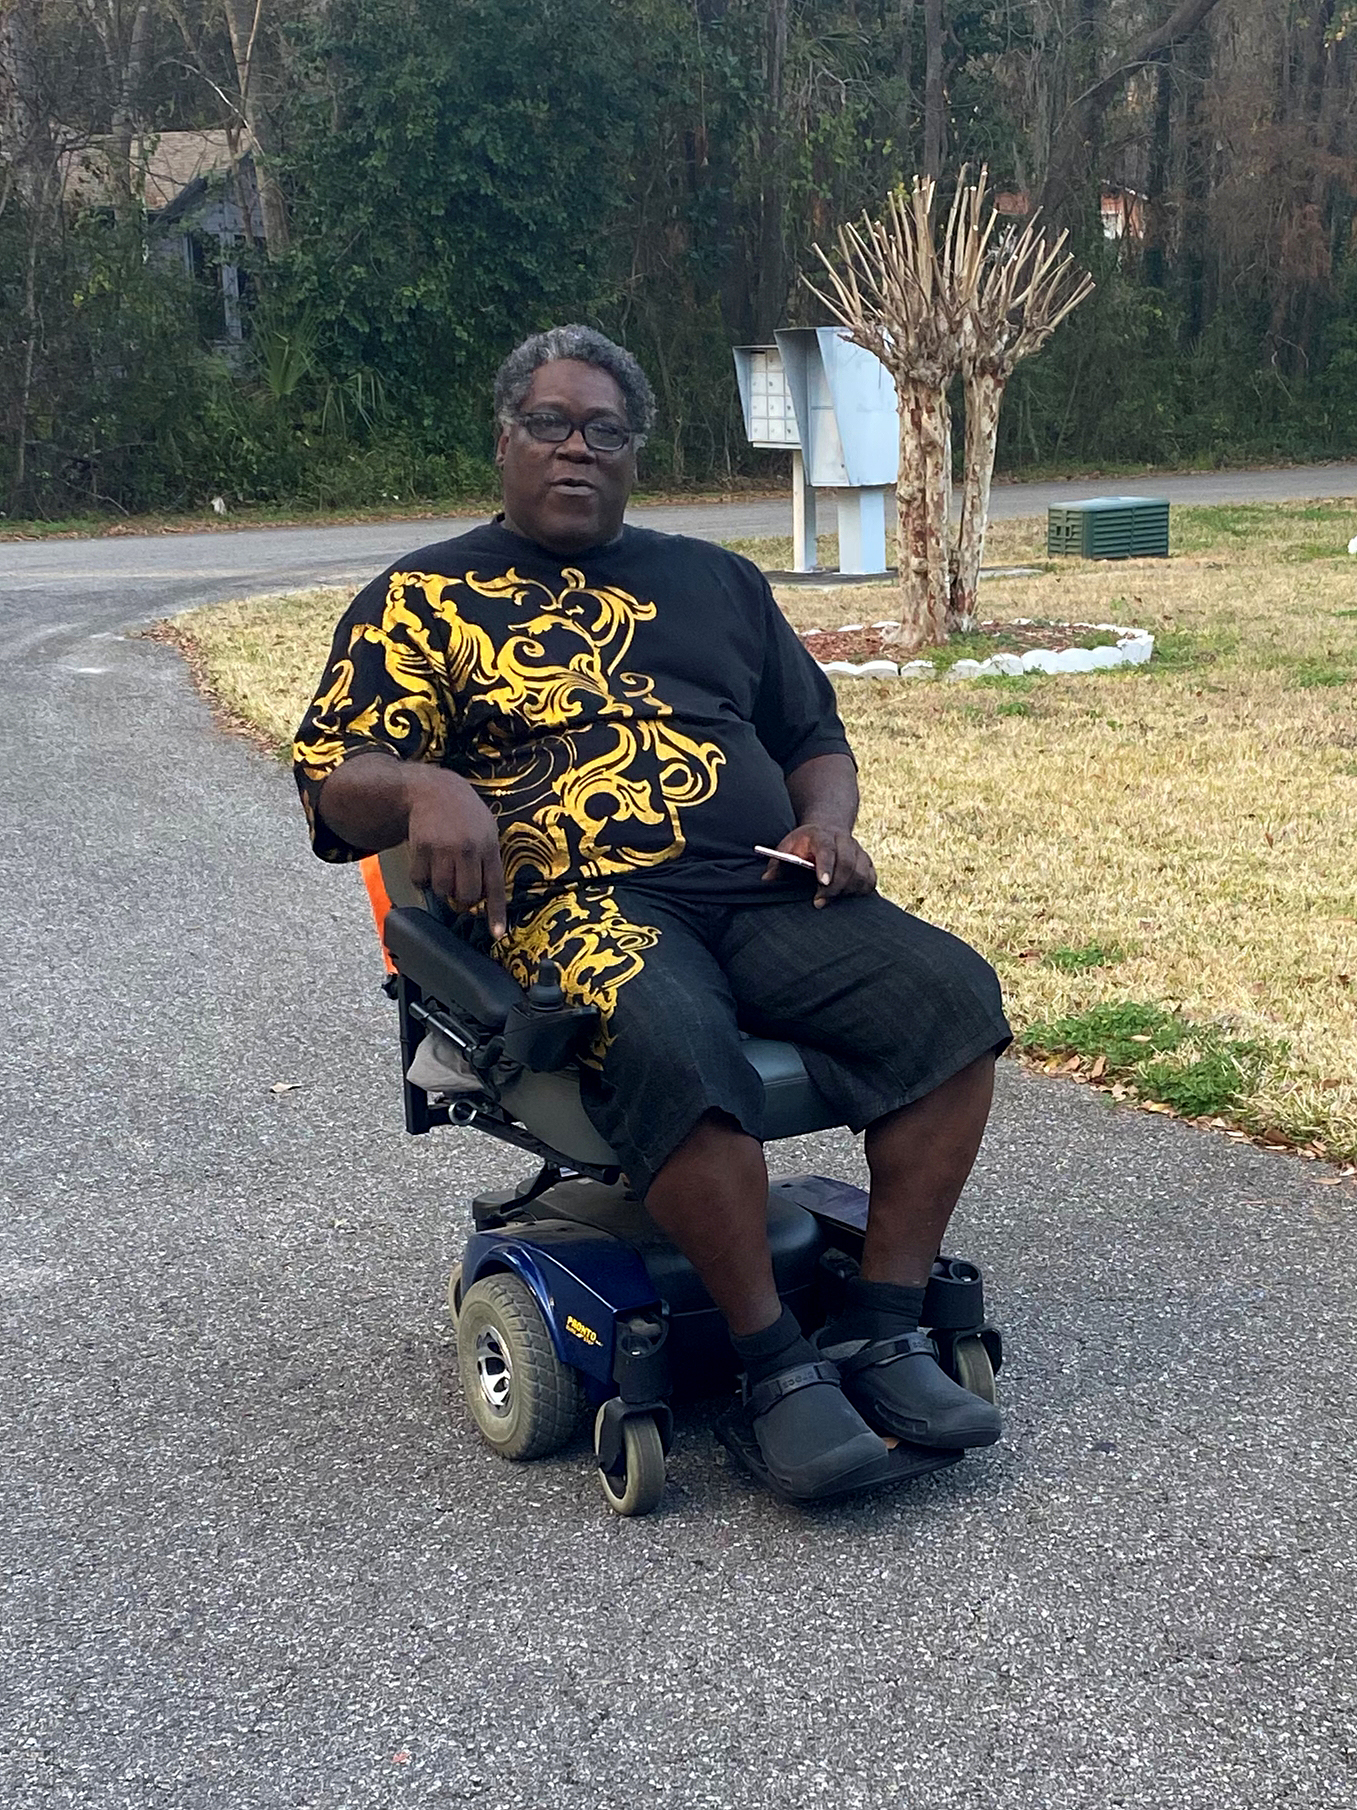 PHOTO: Murray, a formerly incarcerated man, is receiving monthly cash assistance as part of a guaranteed income program in Gainesville, Florida.